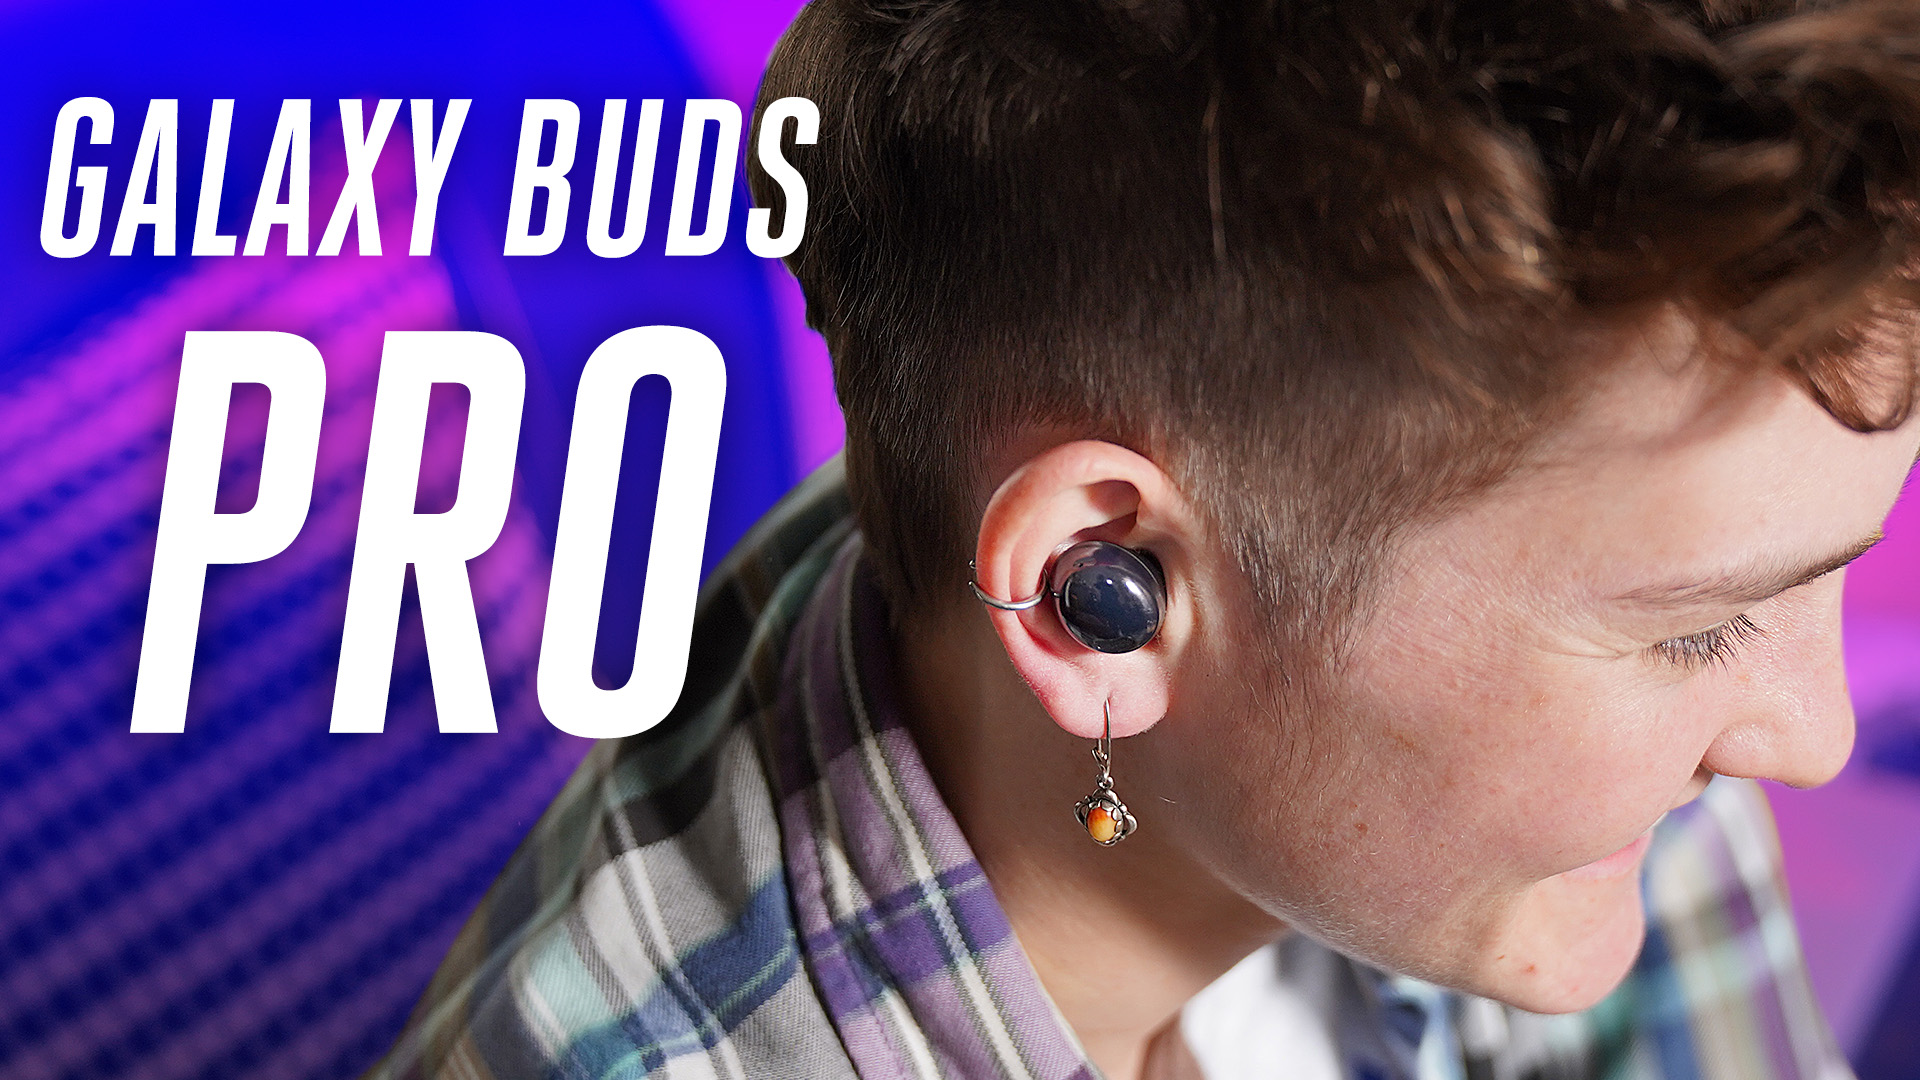 Samsung Galaxy Buds Pro review: Jack of all trades - HardwareZone